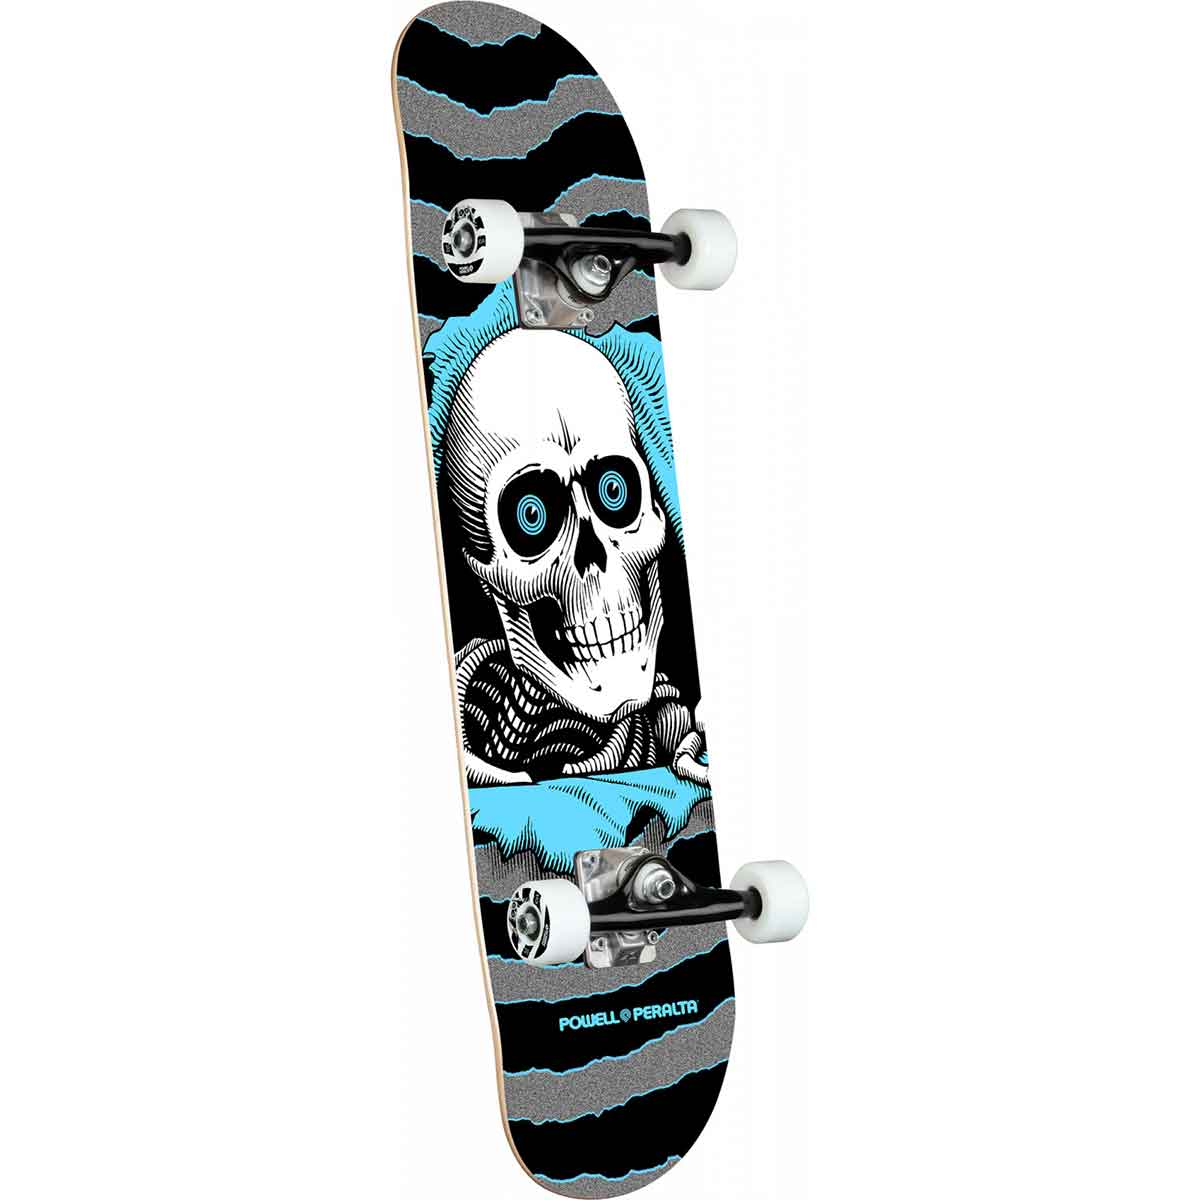 POWELL PERALTA RIPPER ONE OFF COMPLETE SILVER / LIGHT BLUE 7.75